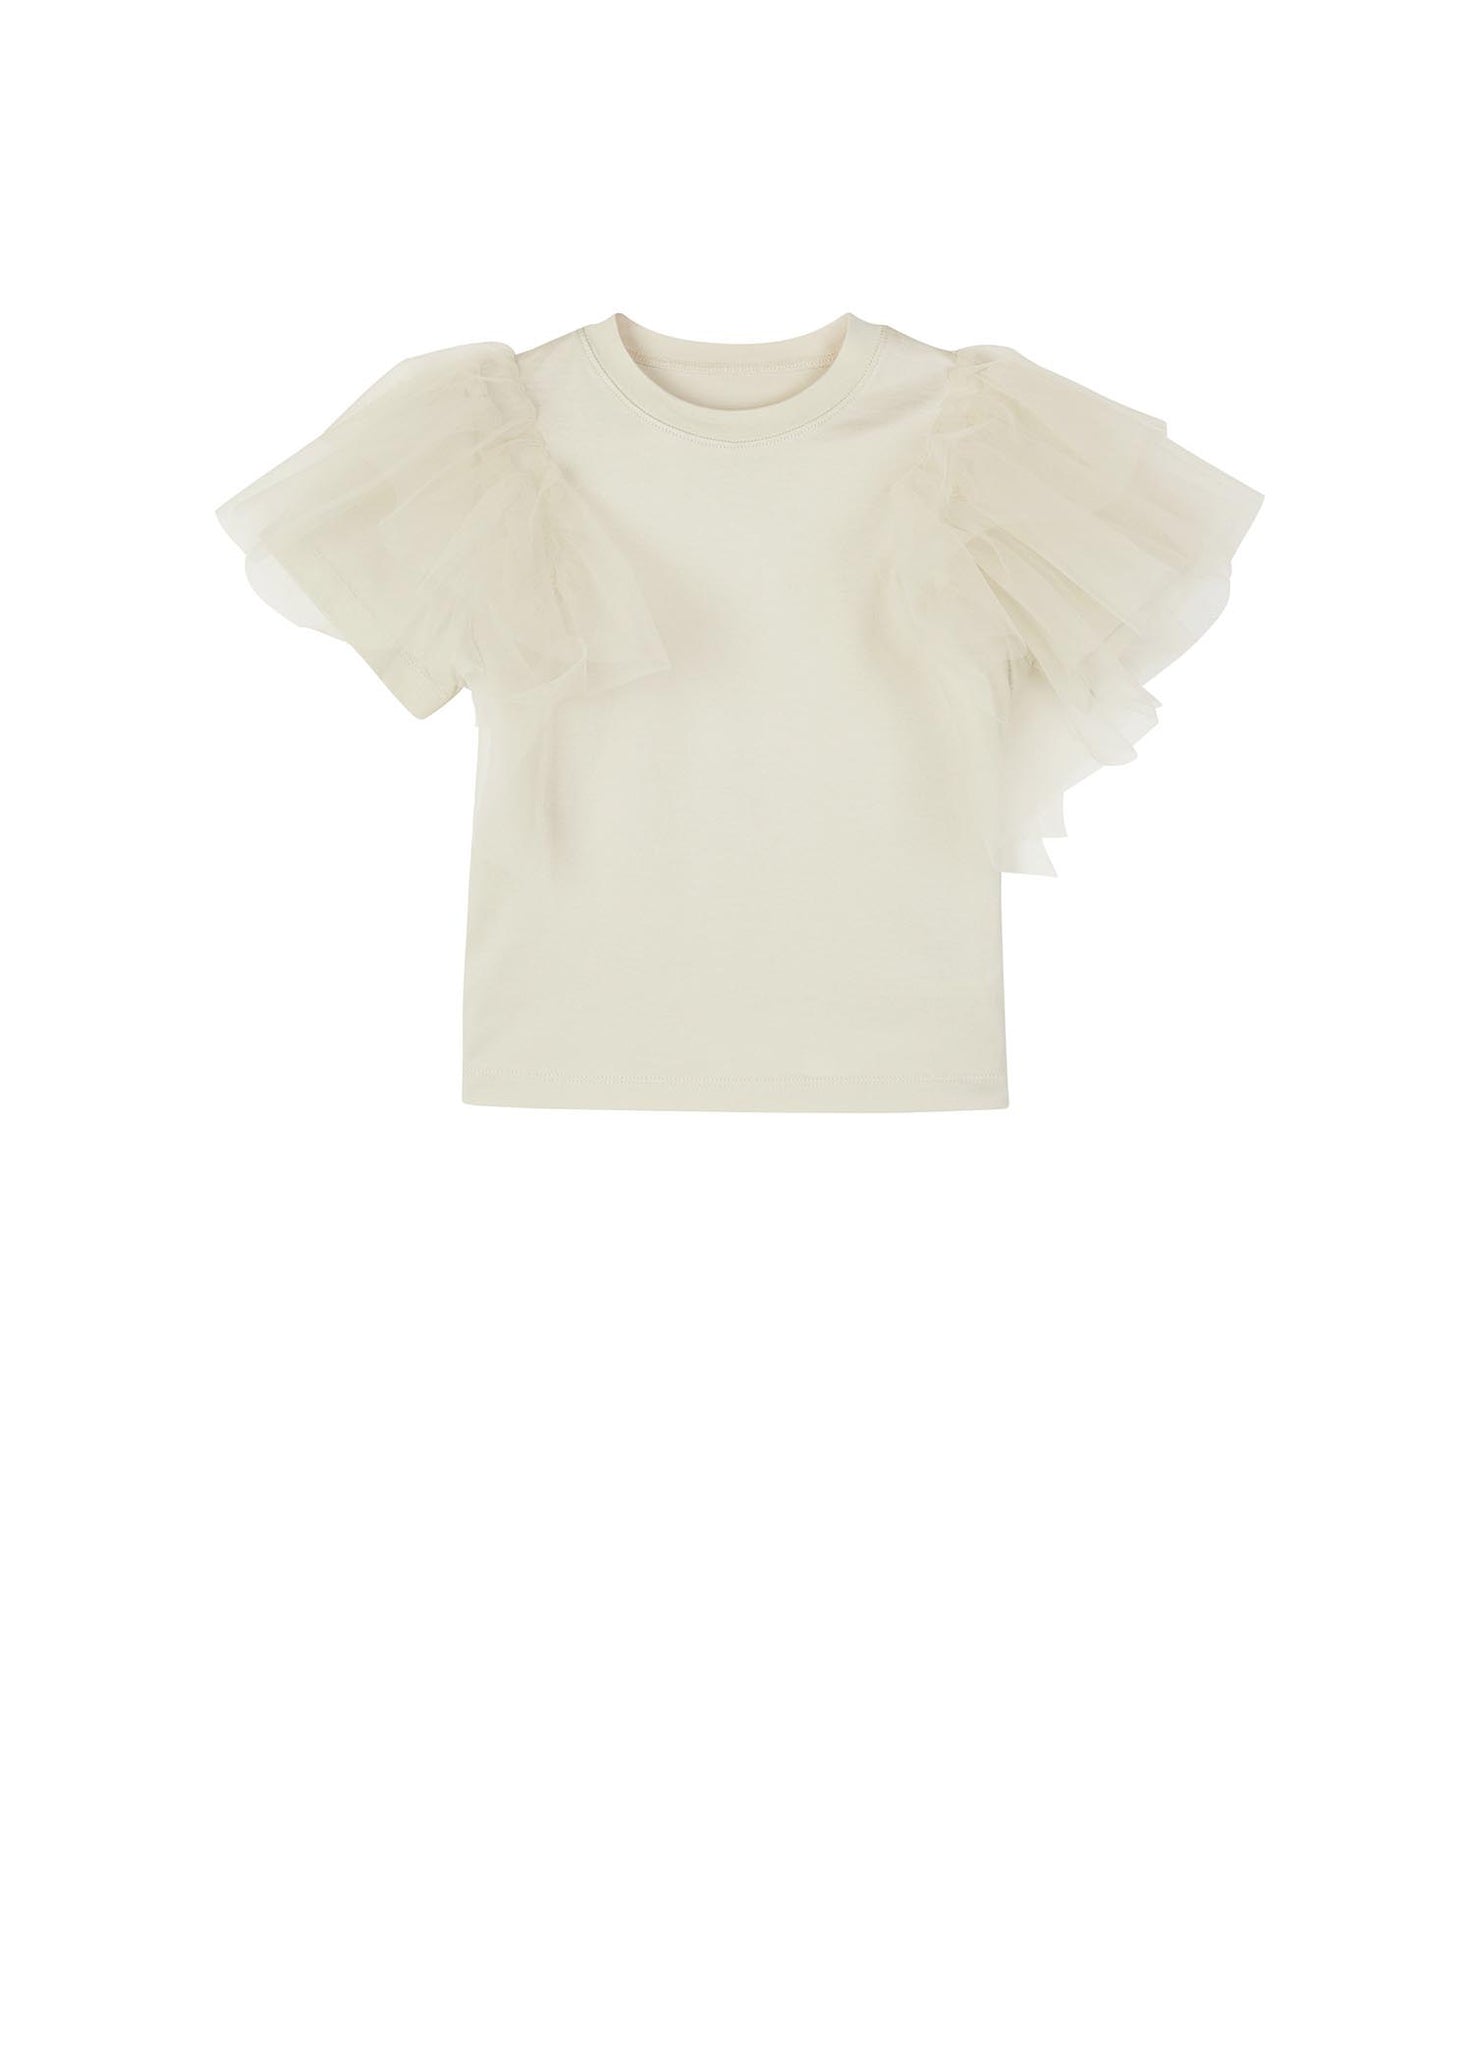 T-Shirt / jnby by JNBY Meshed Shoulder Short Sleeve T-Shirt (100% Cotton)